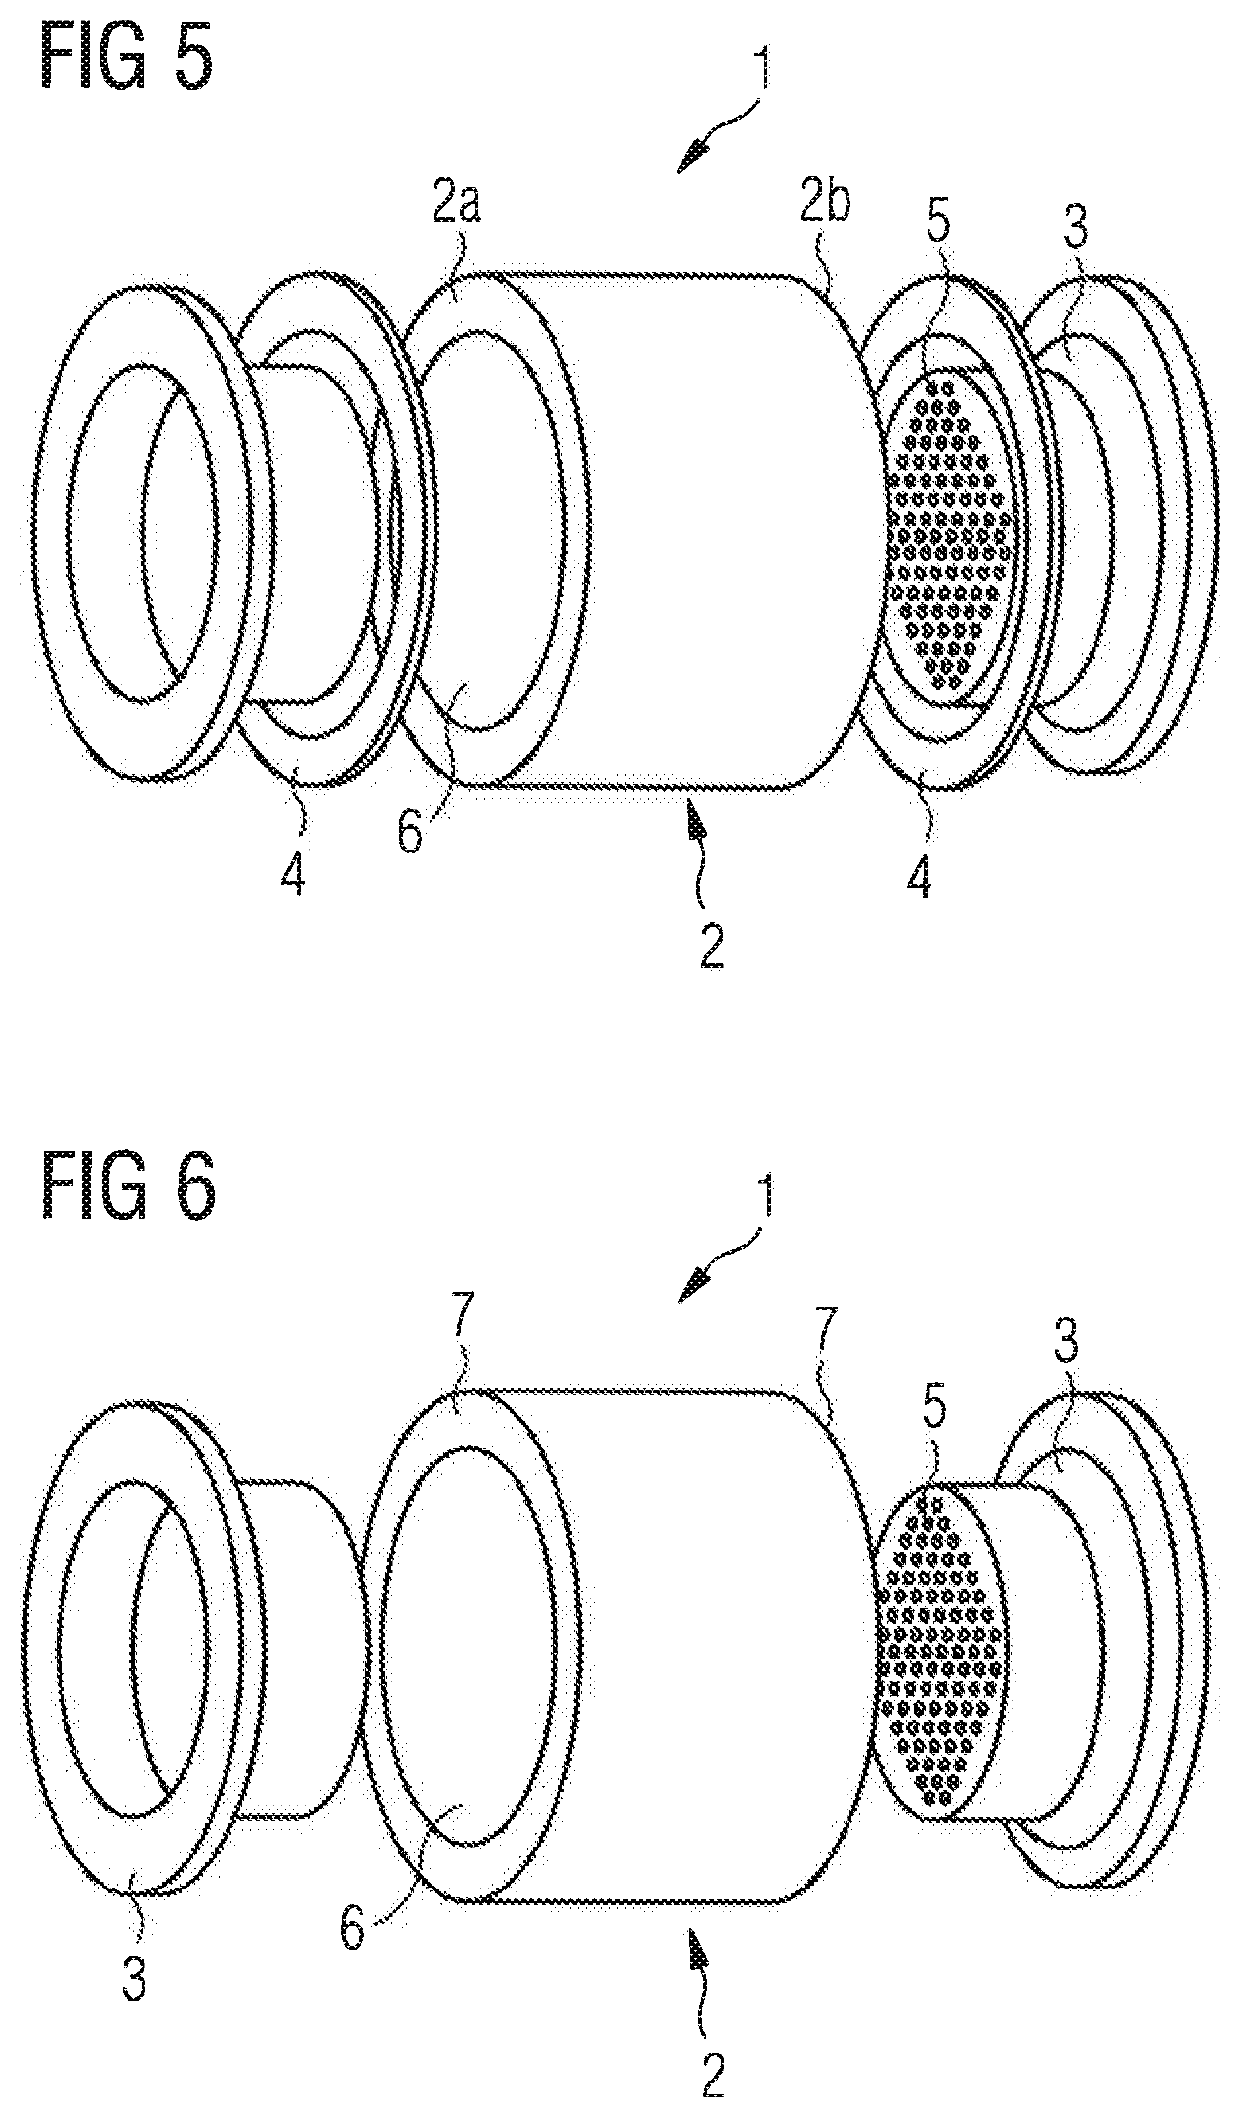 Method for Producing a Gas-Tight Metal-Ceramic Join and Use of the Gas-Tight Metal-Ceramic Join